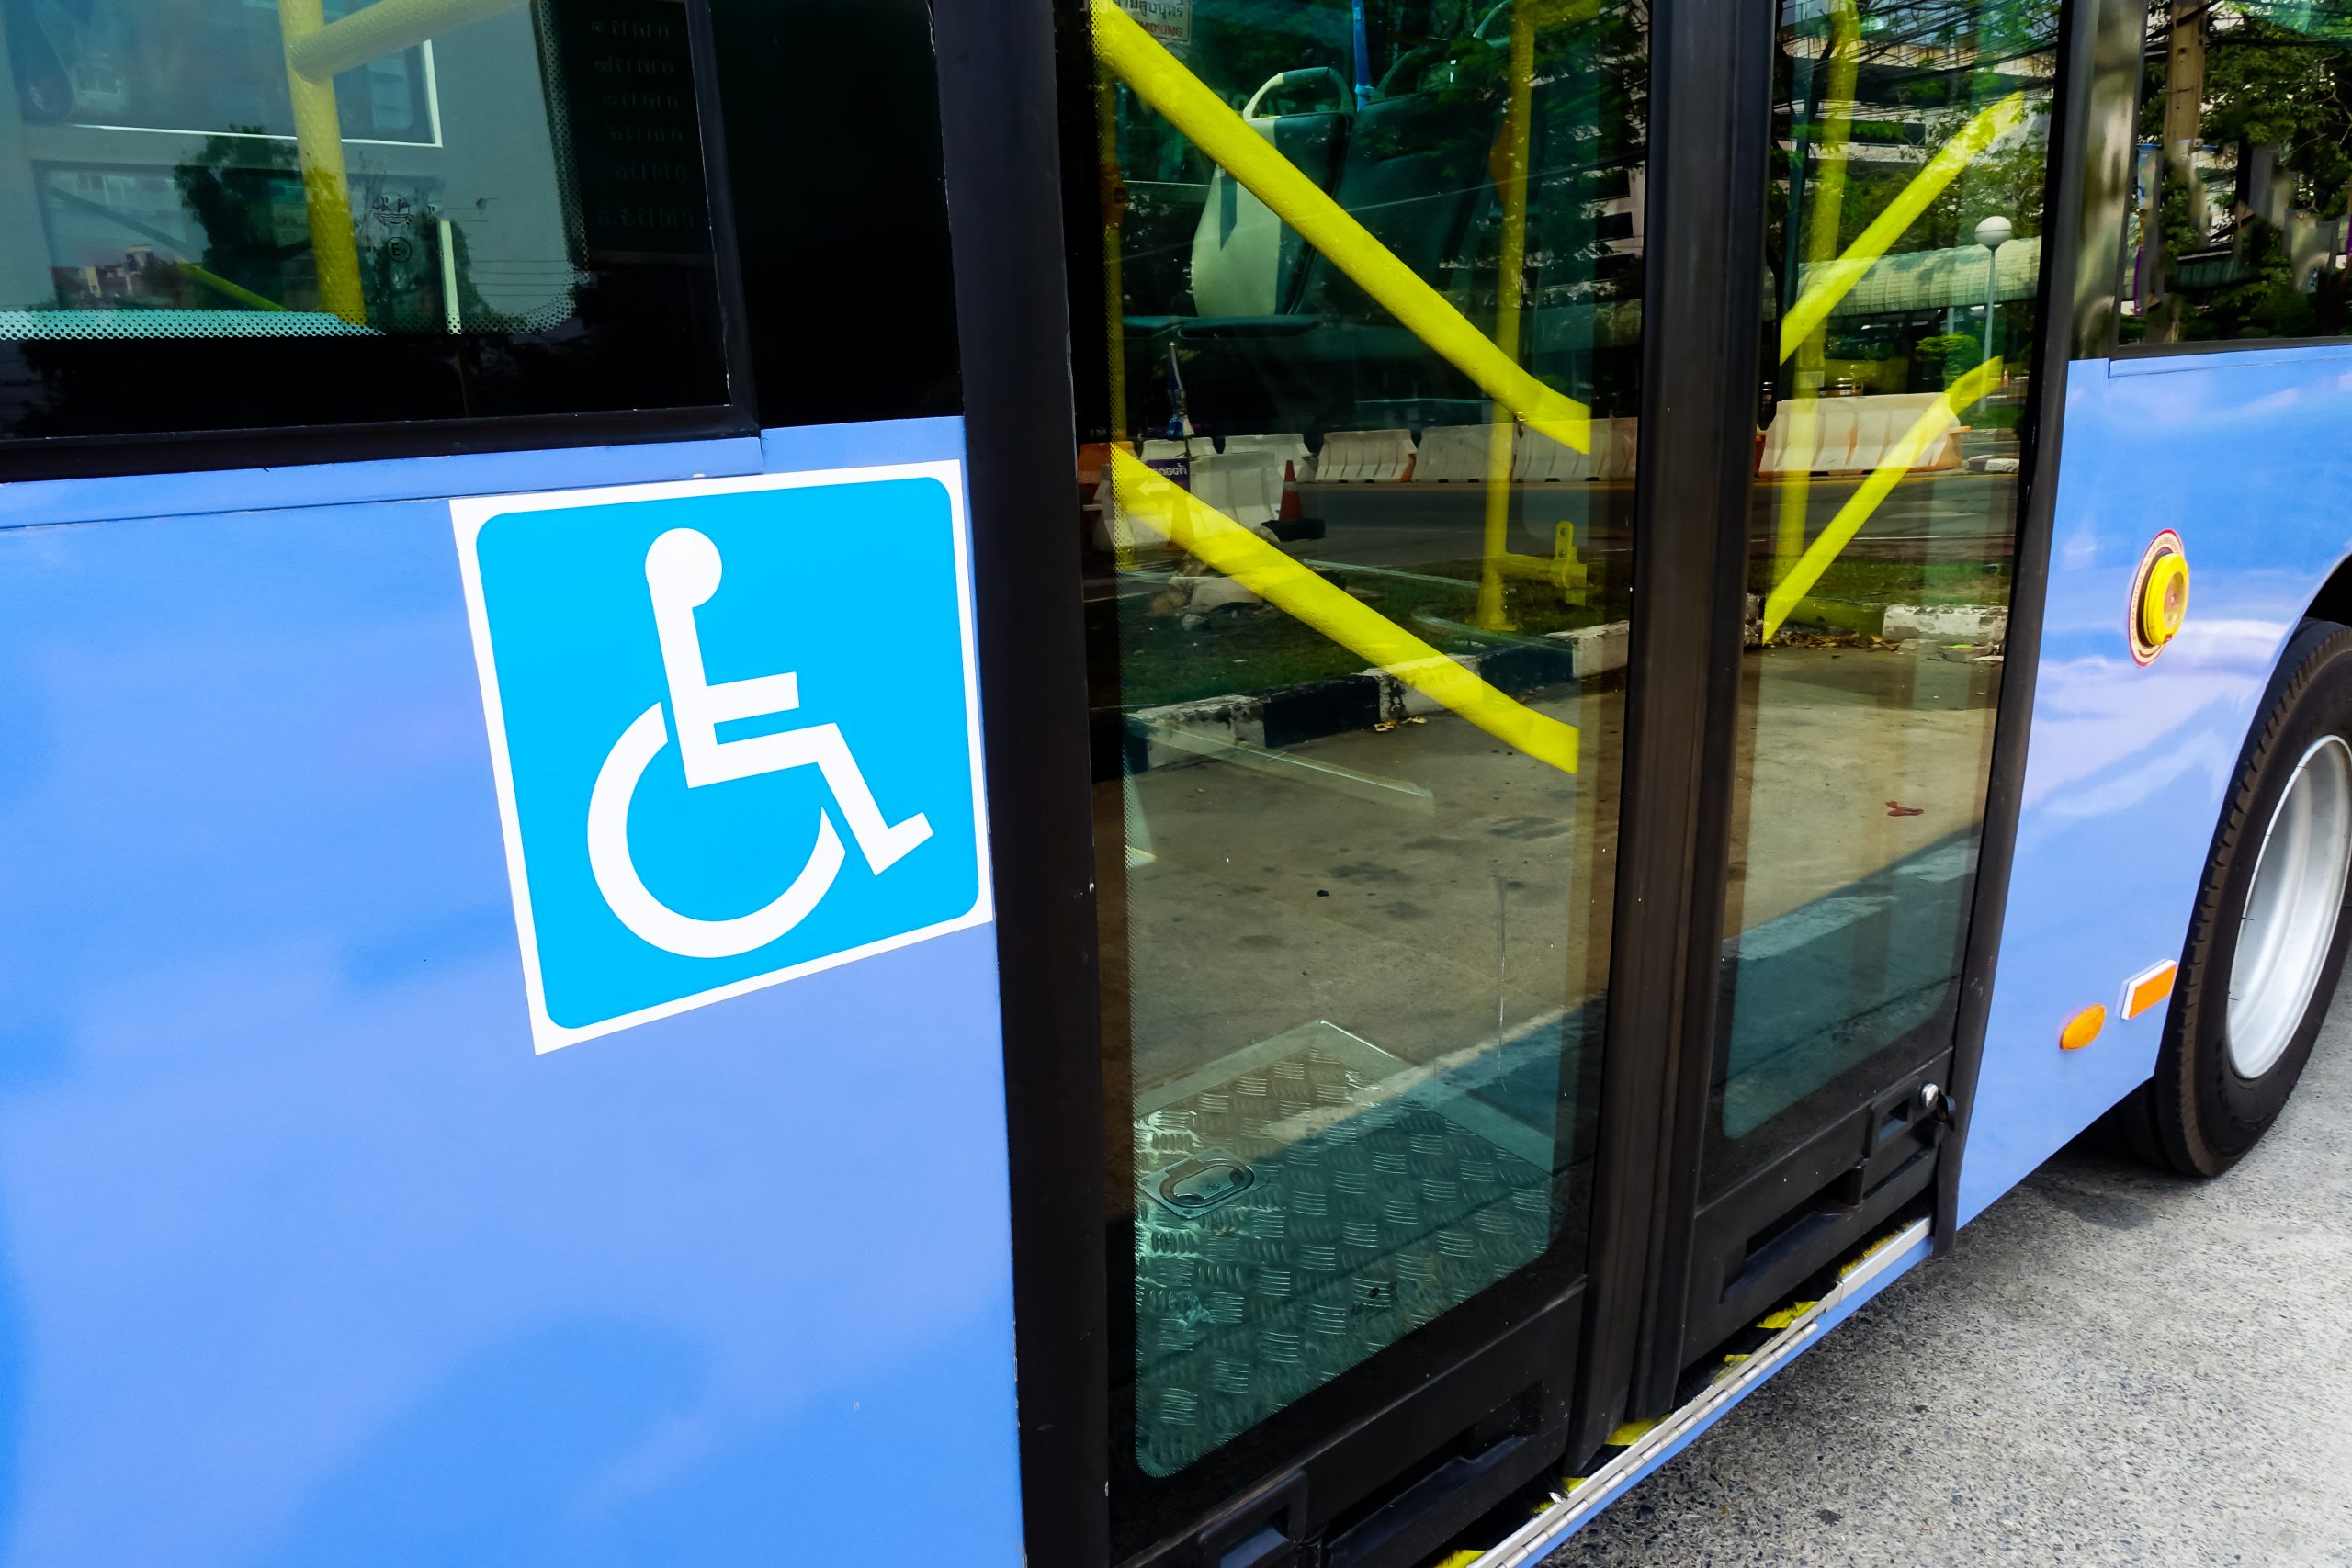 Bus with wheelchair symbol for reserved seating